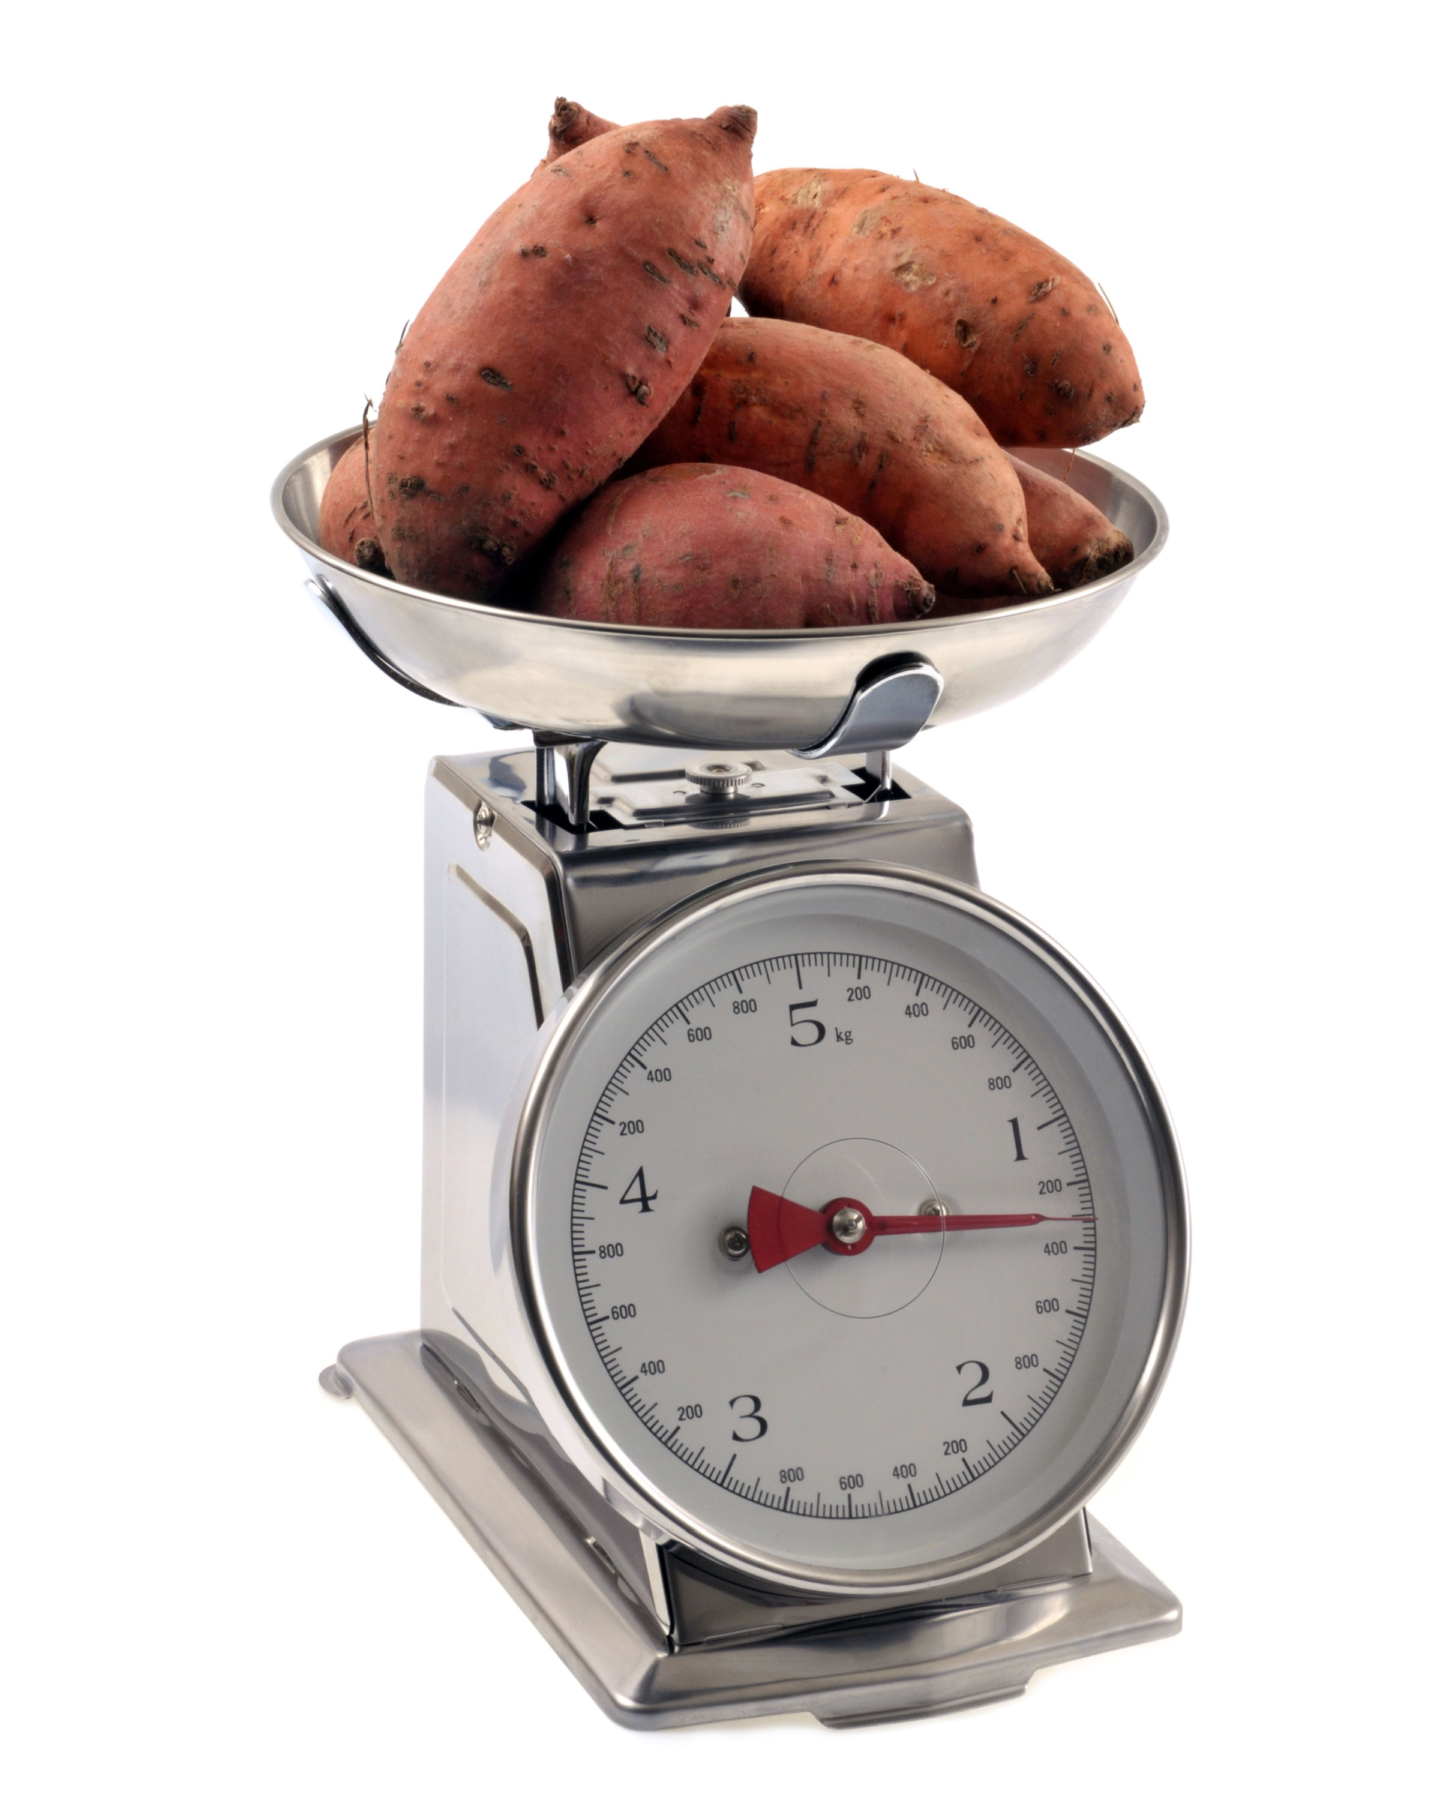 sweet potatoes on a weighing scale